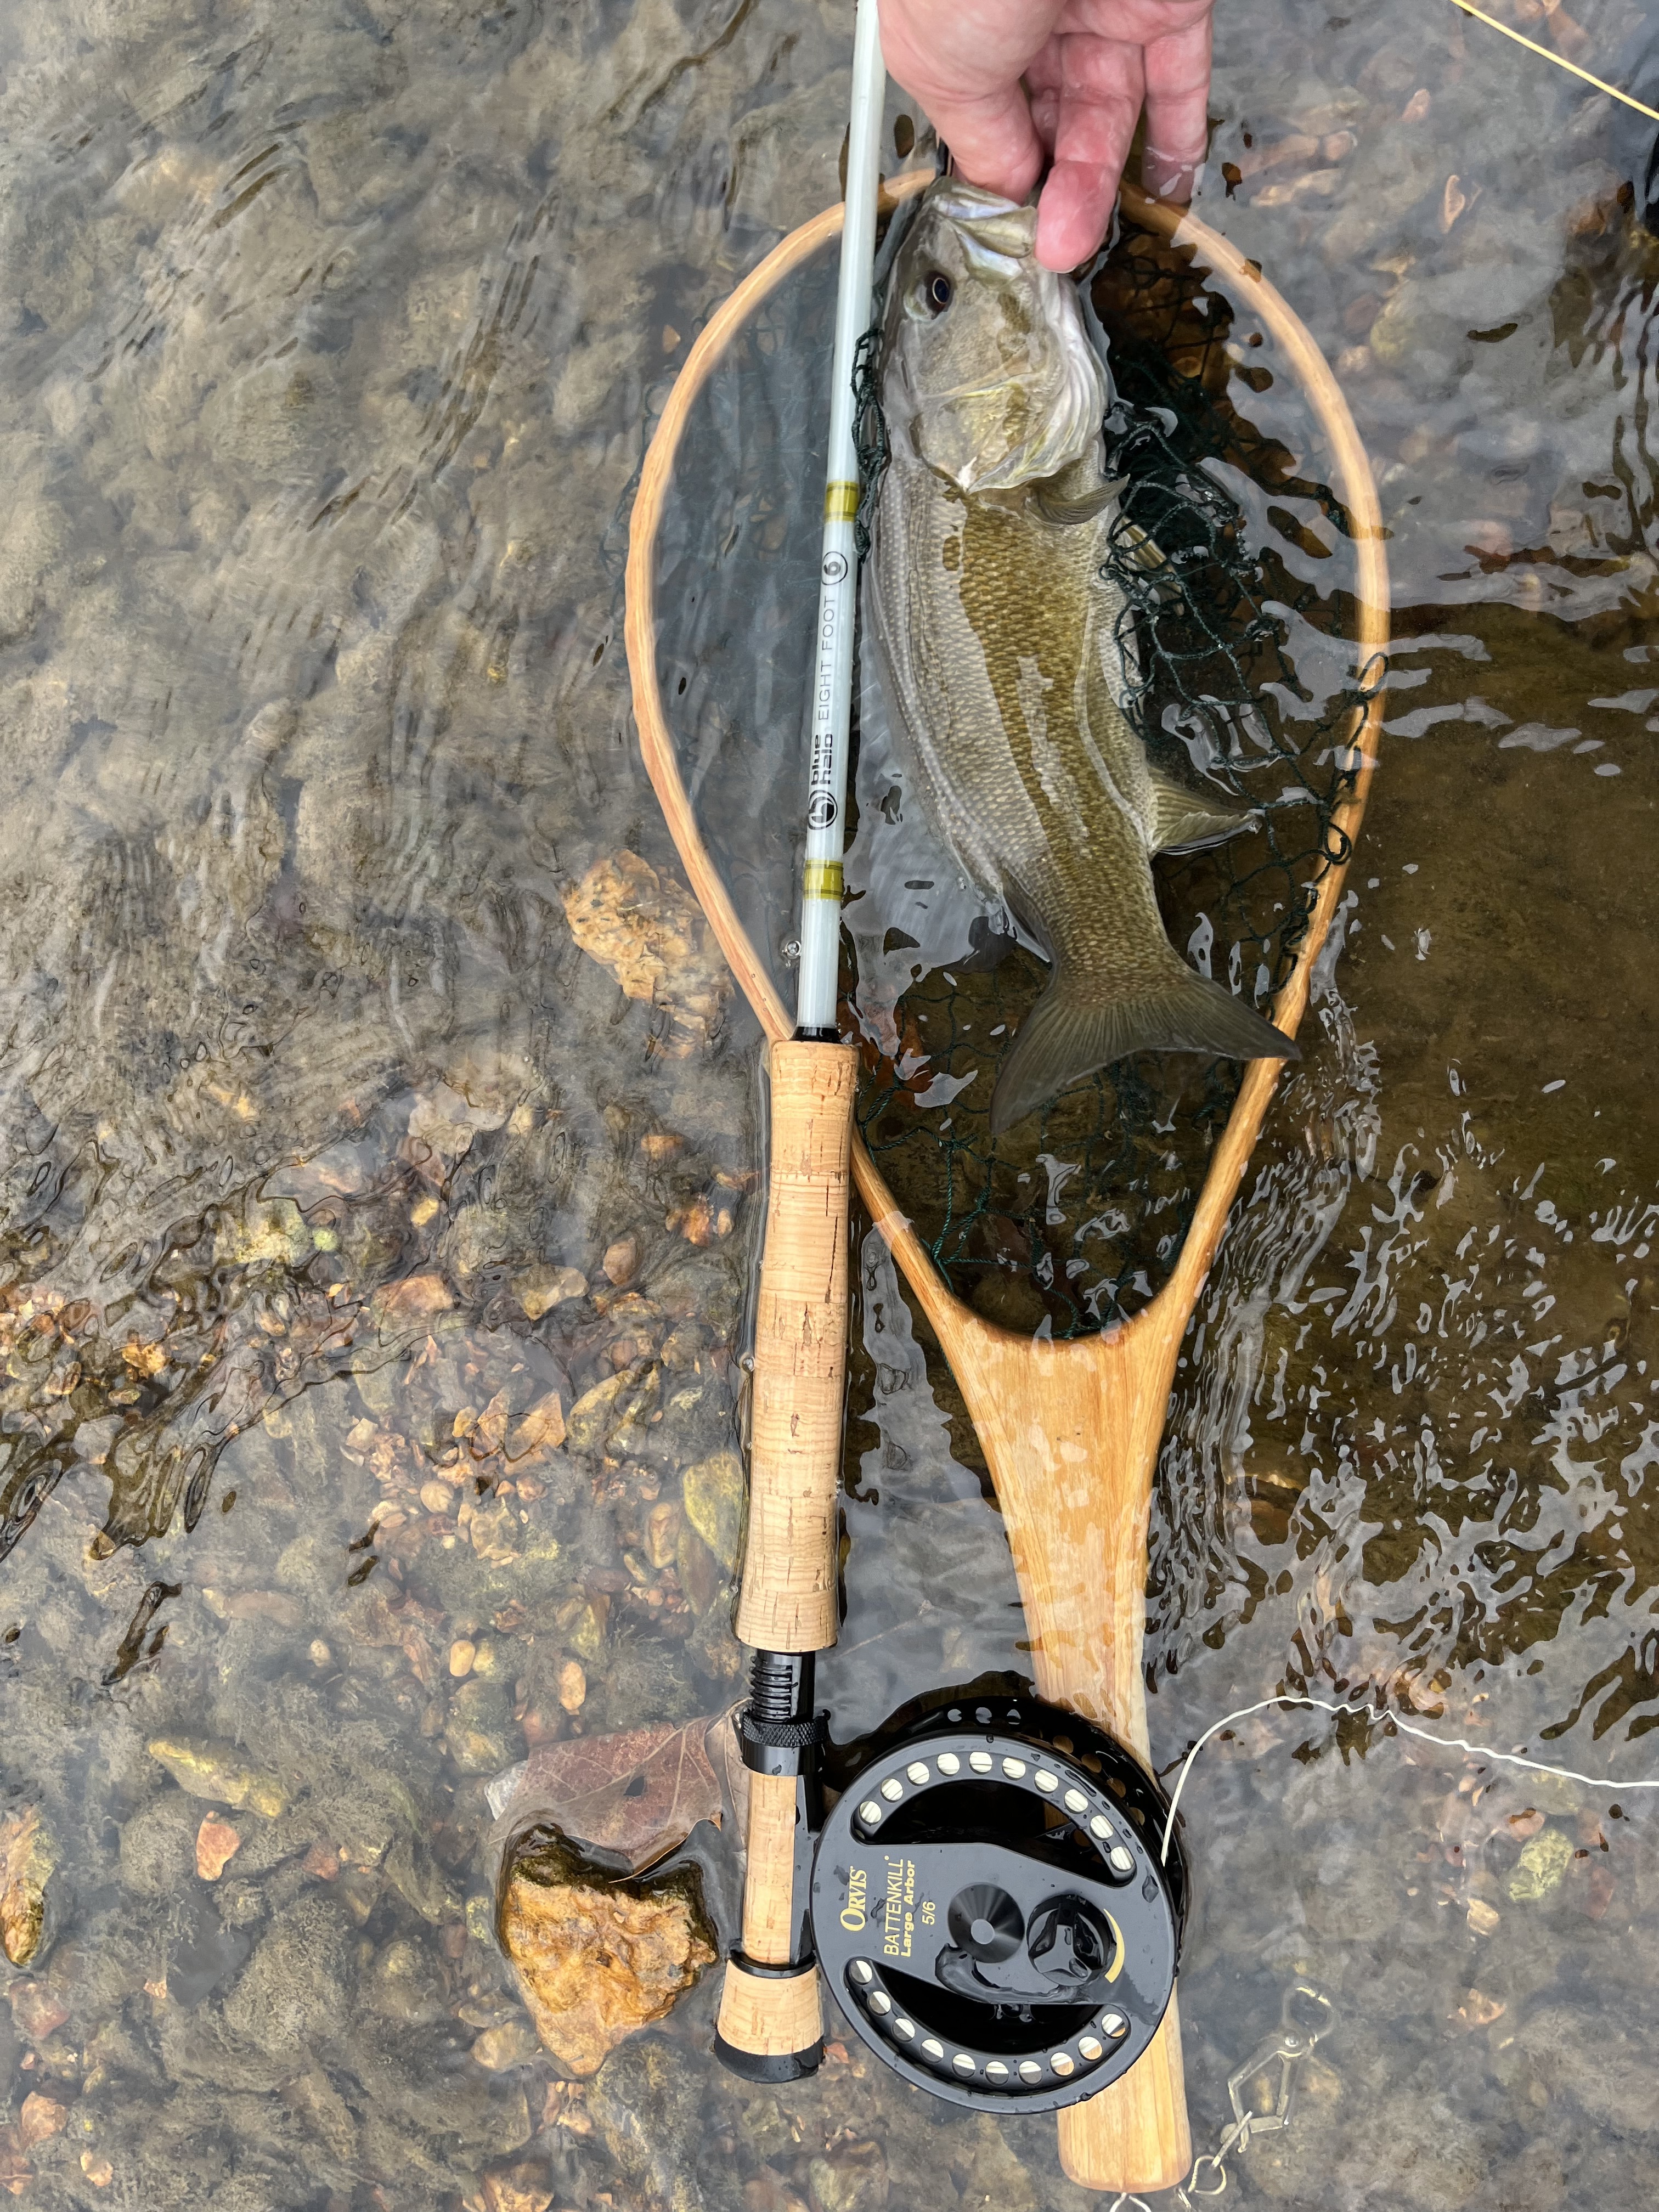 Wading some creeks. Panfish and Smallies, Fishing with Fiberglass Fly Rods